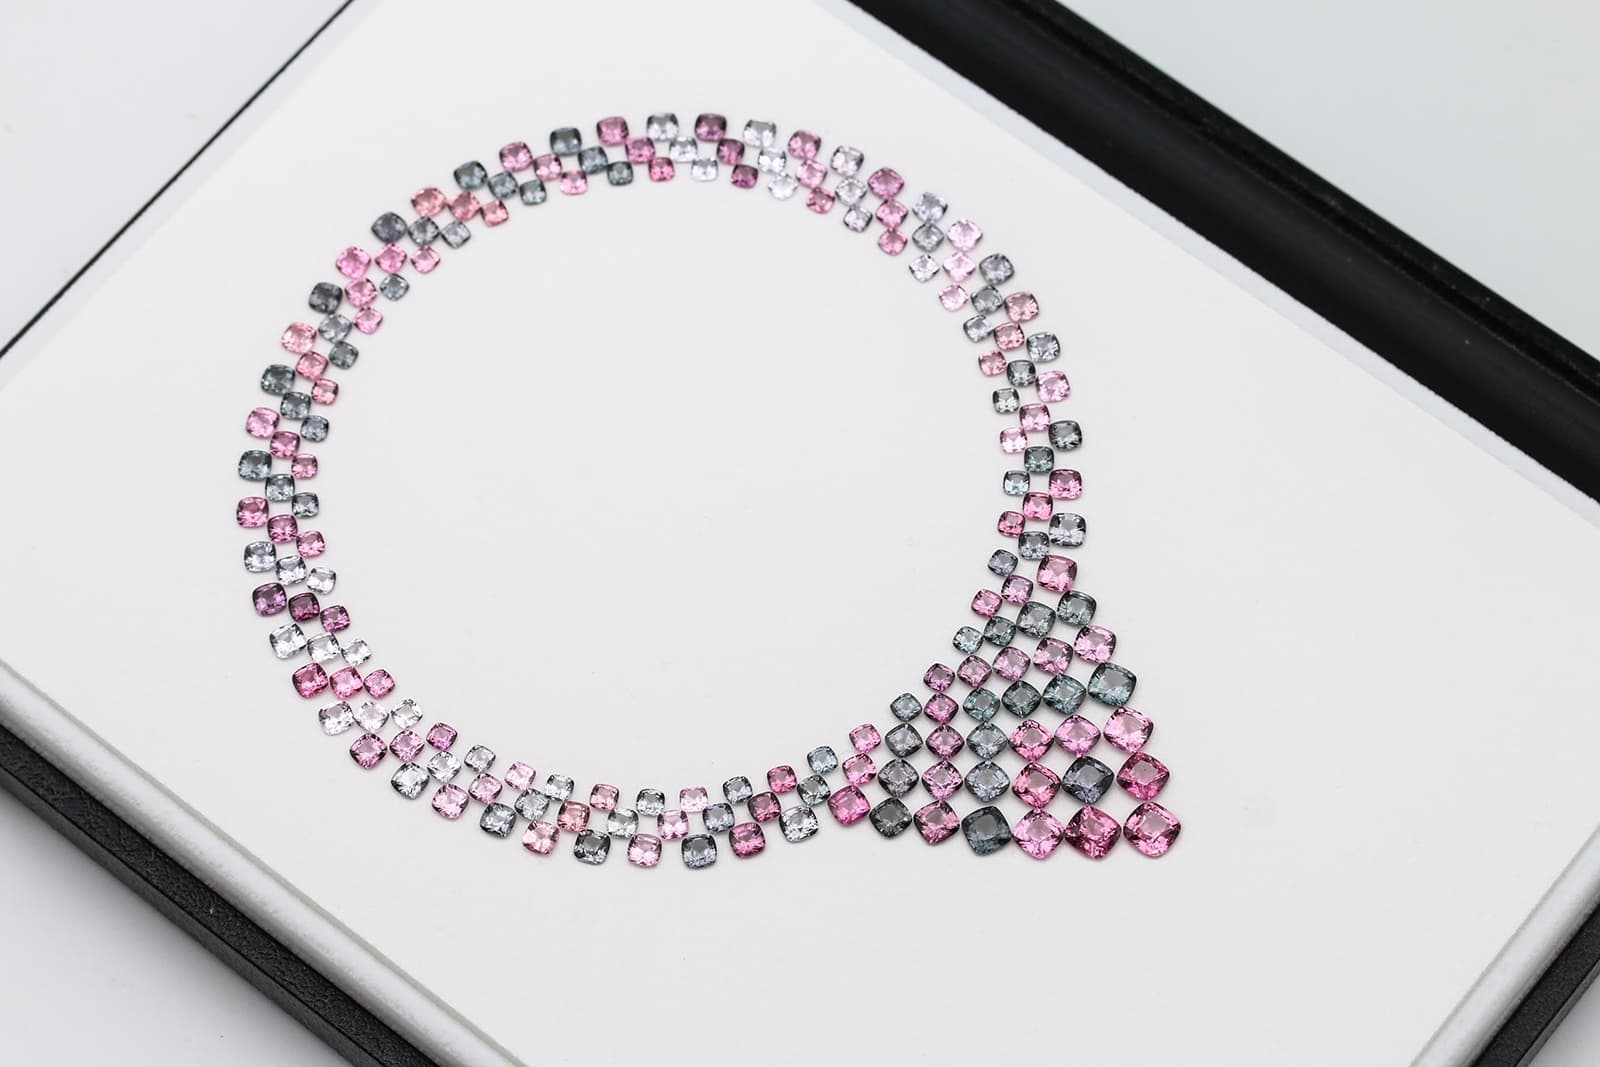 A necklace layout with multiple shades of cushion-shaped spinel gemstones by Paul Wild